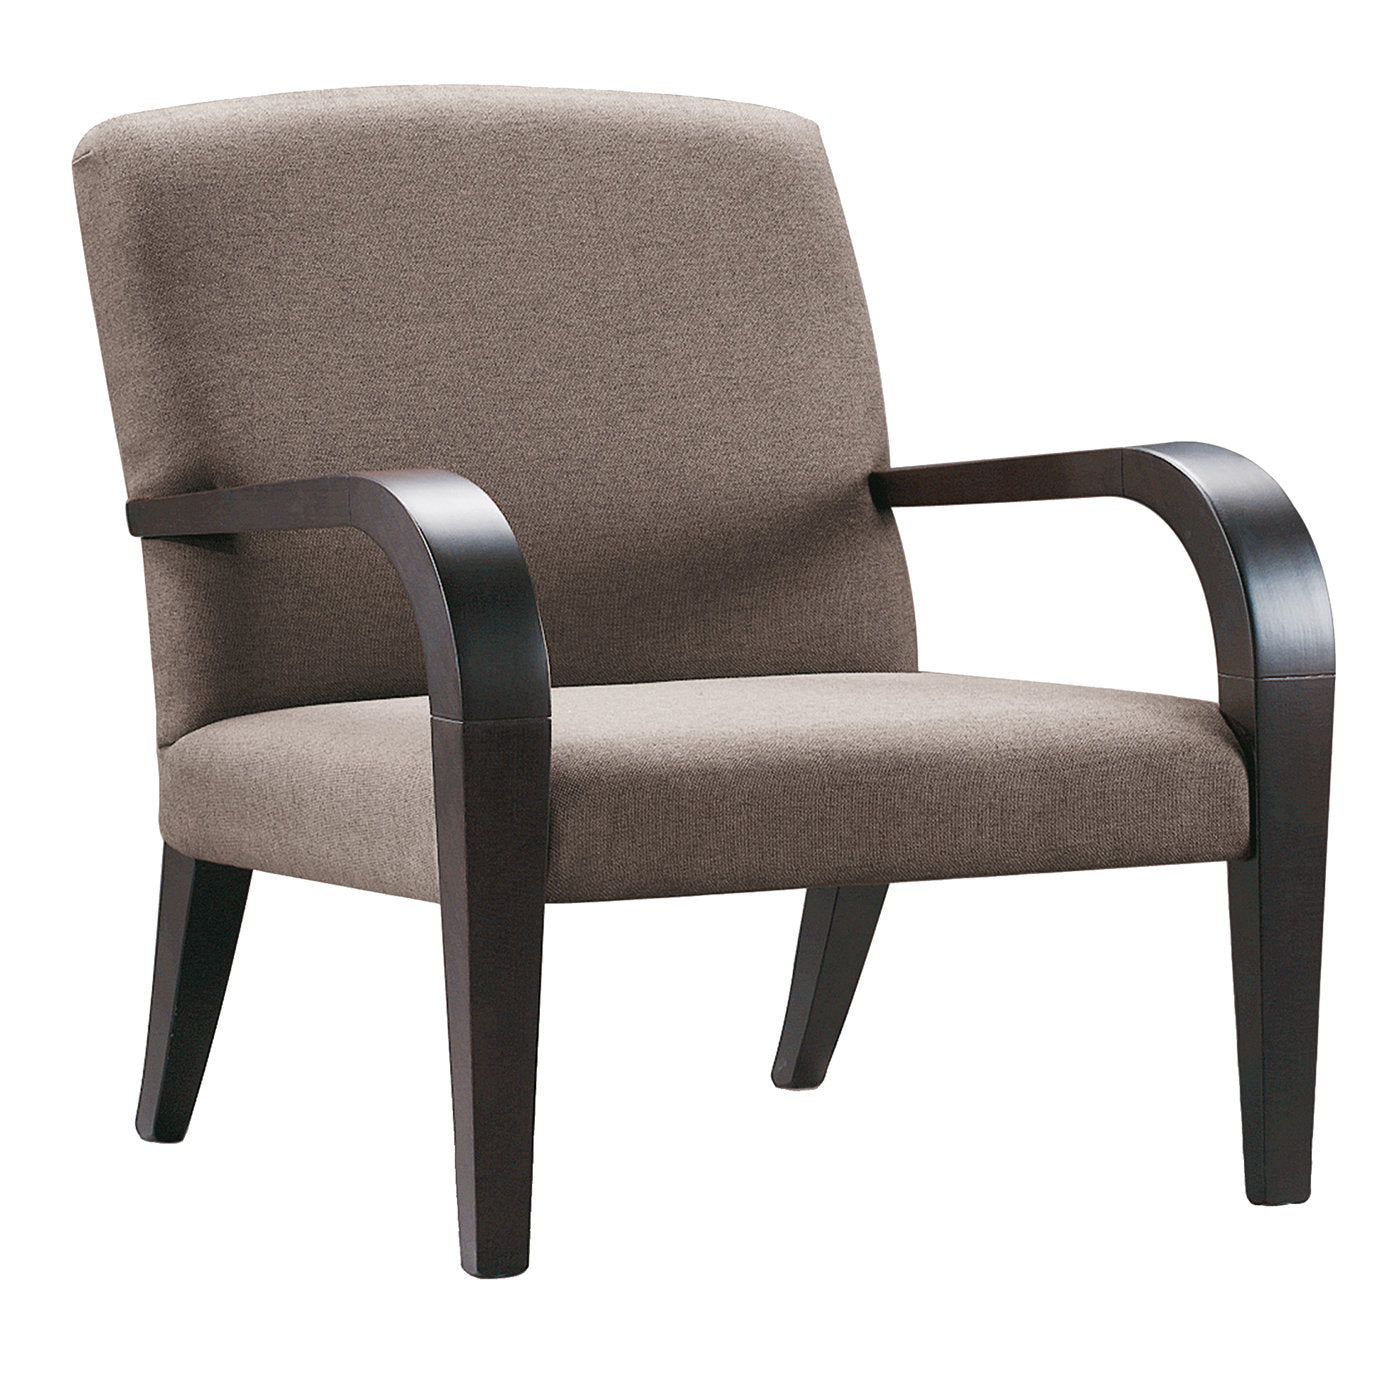 Brown Tulipwood Armchair with Curved Armrests - Main view